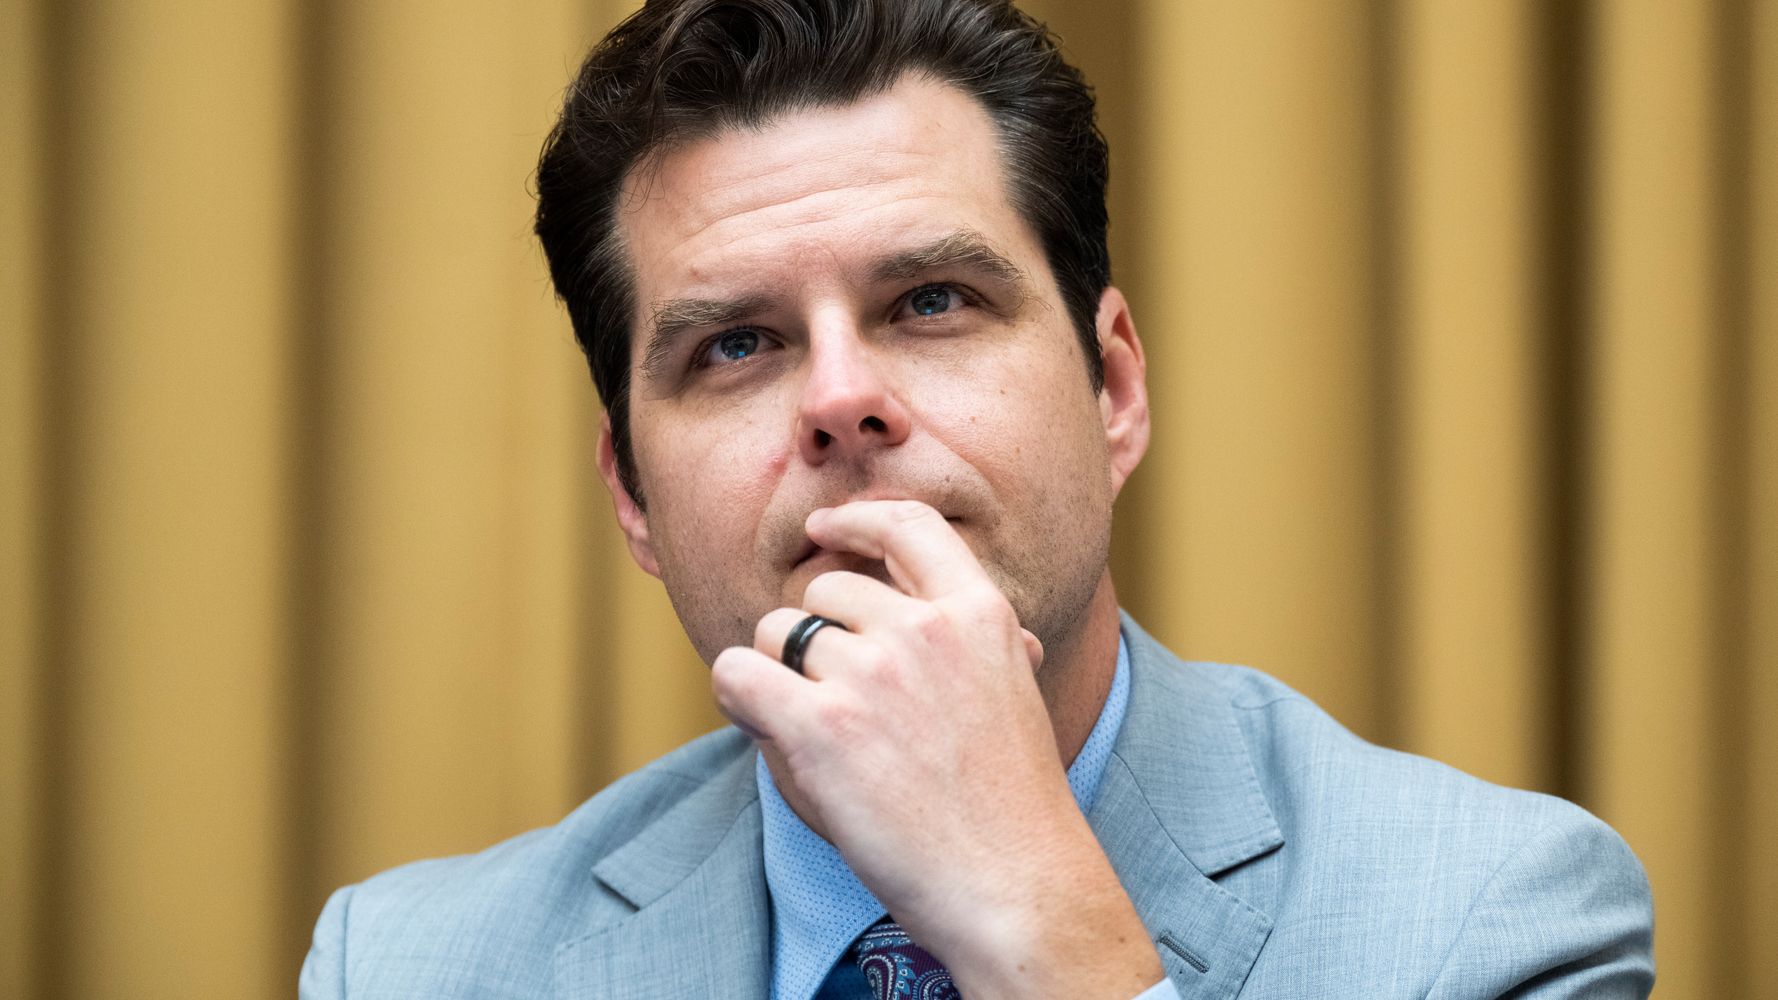 Report: Matt Gaetz Told Roger Stone ‘Big Guy’ Would Likely Get Him Off